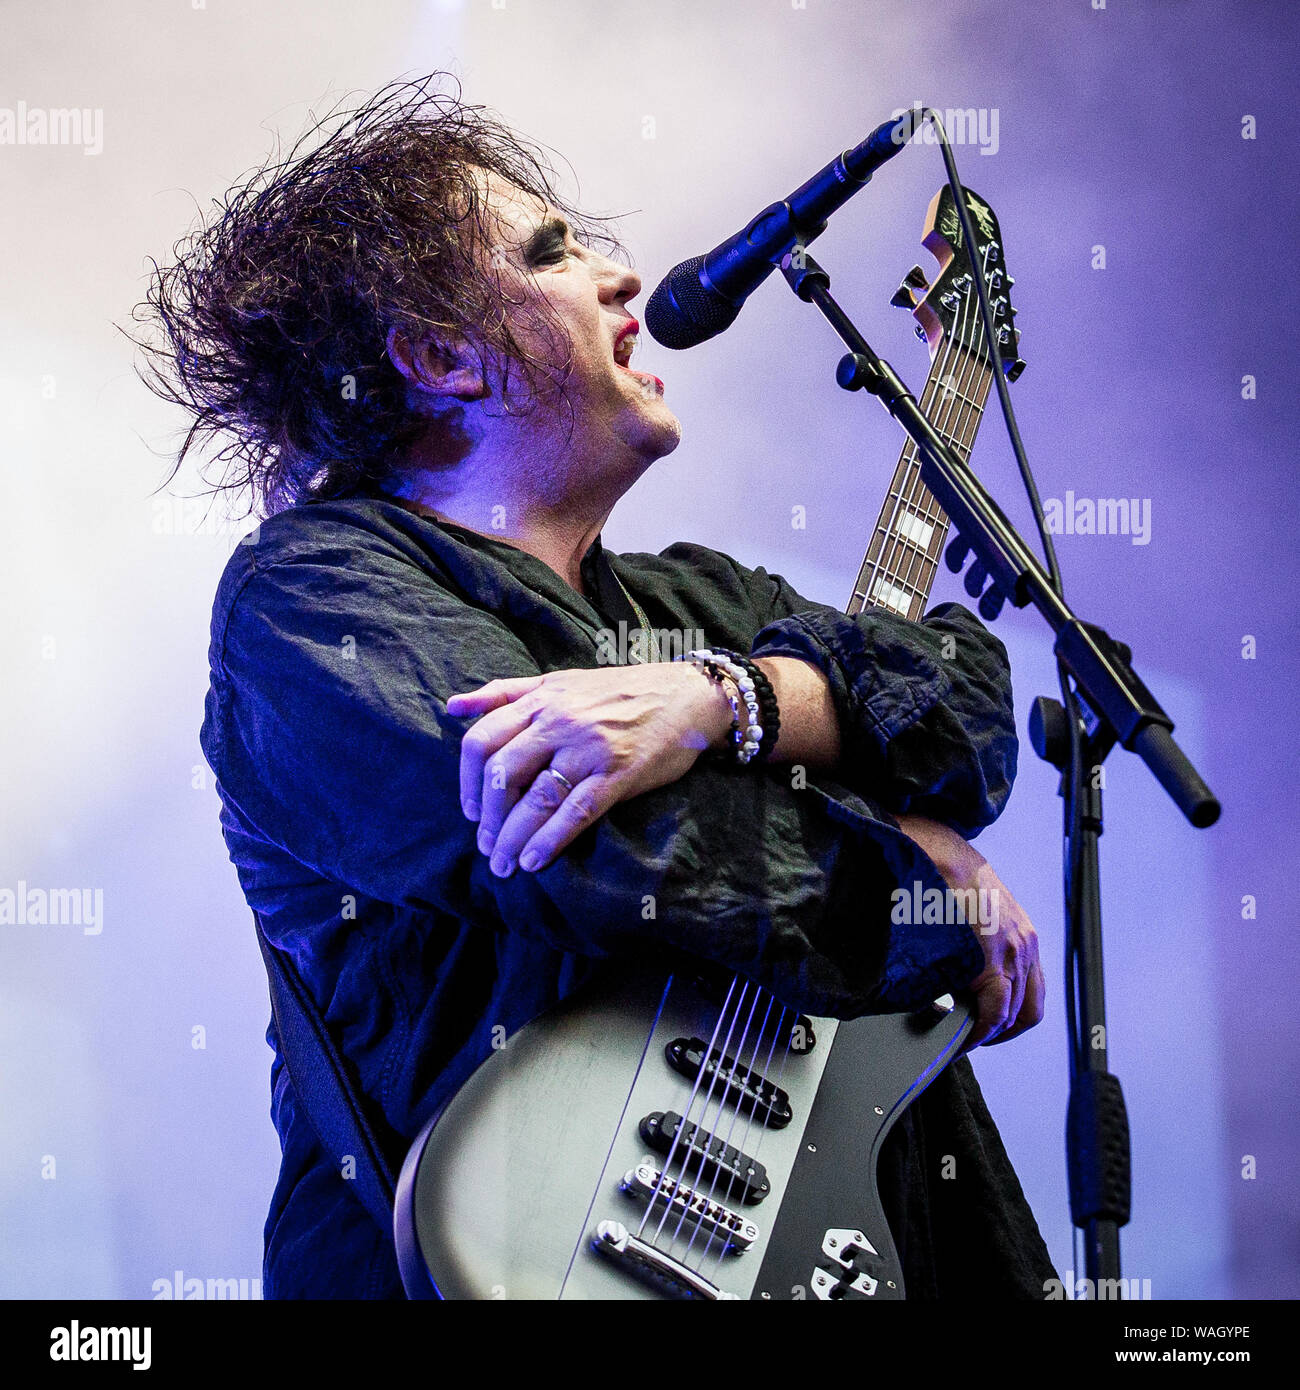 Robert Smith of The Cure performing live at Øyafestivalen, a music festival in Oslo, Norway, on 7 August 2019 Stock Photo